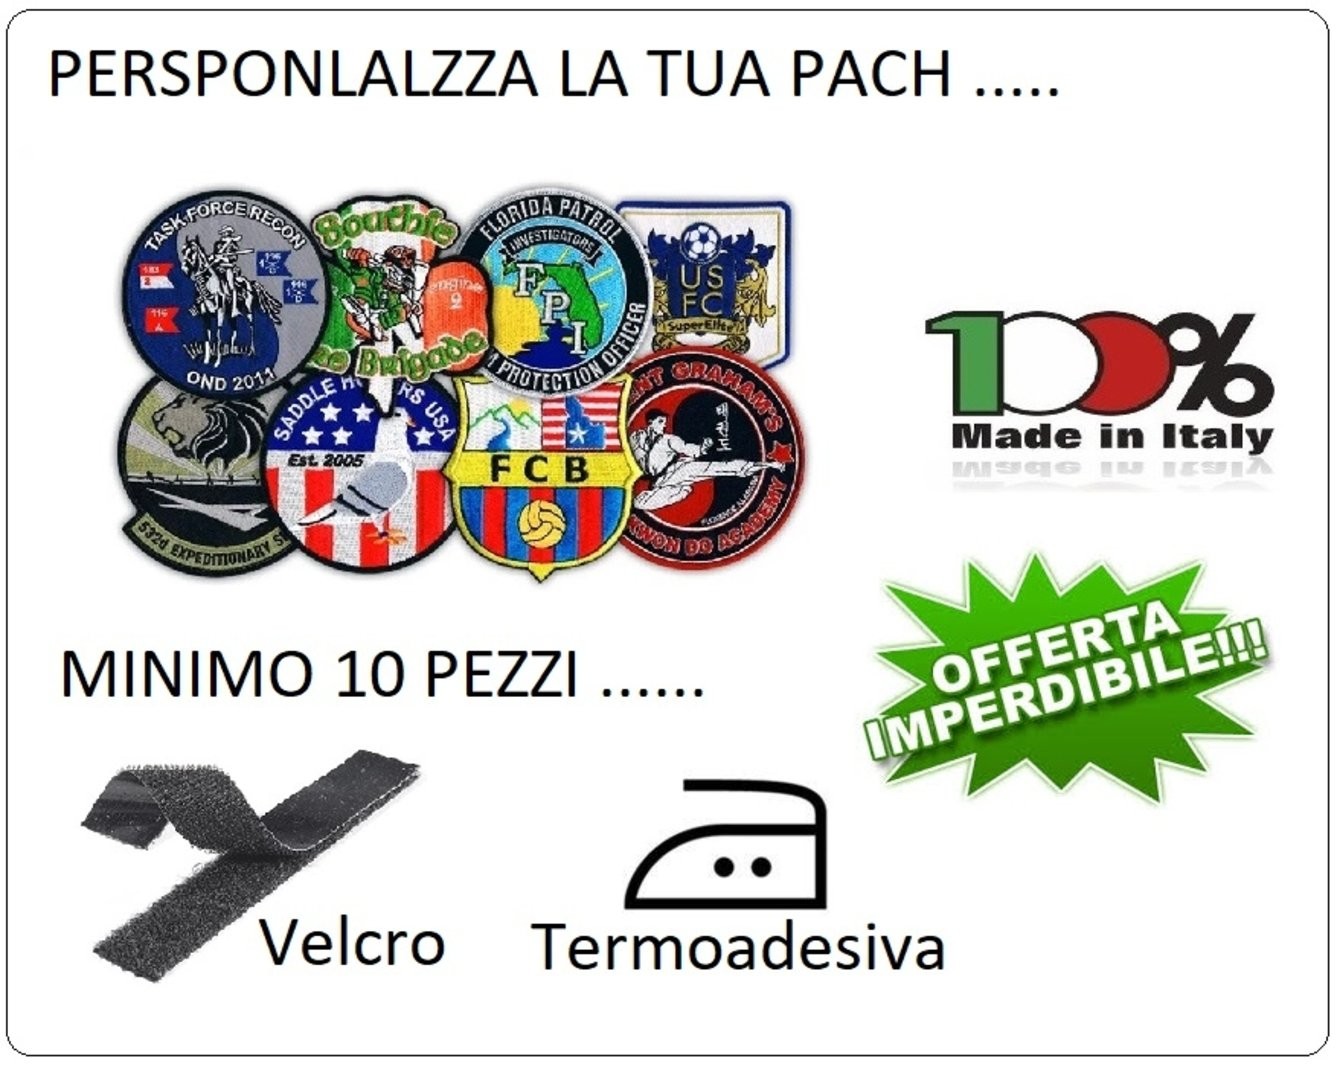 Toppe personalizzate, Patch ricamate Sport